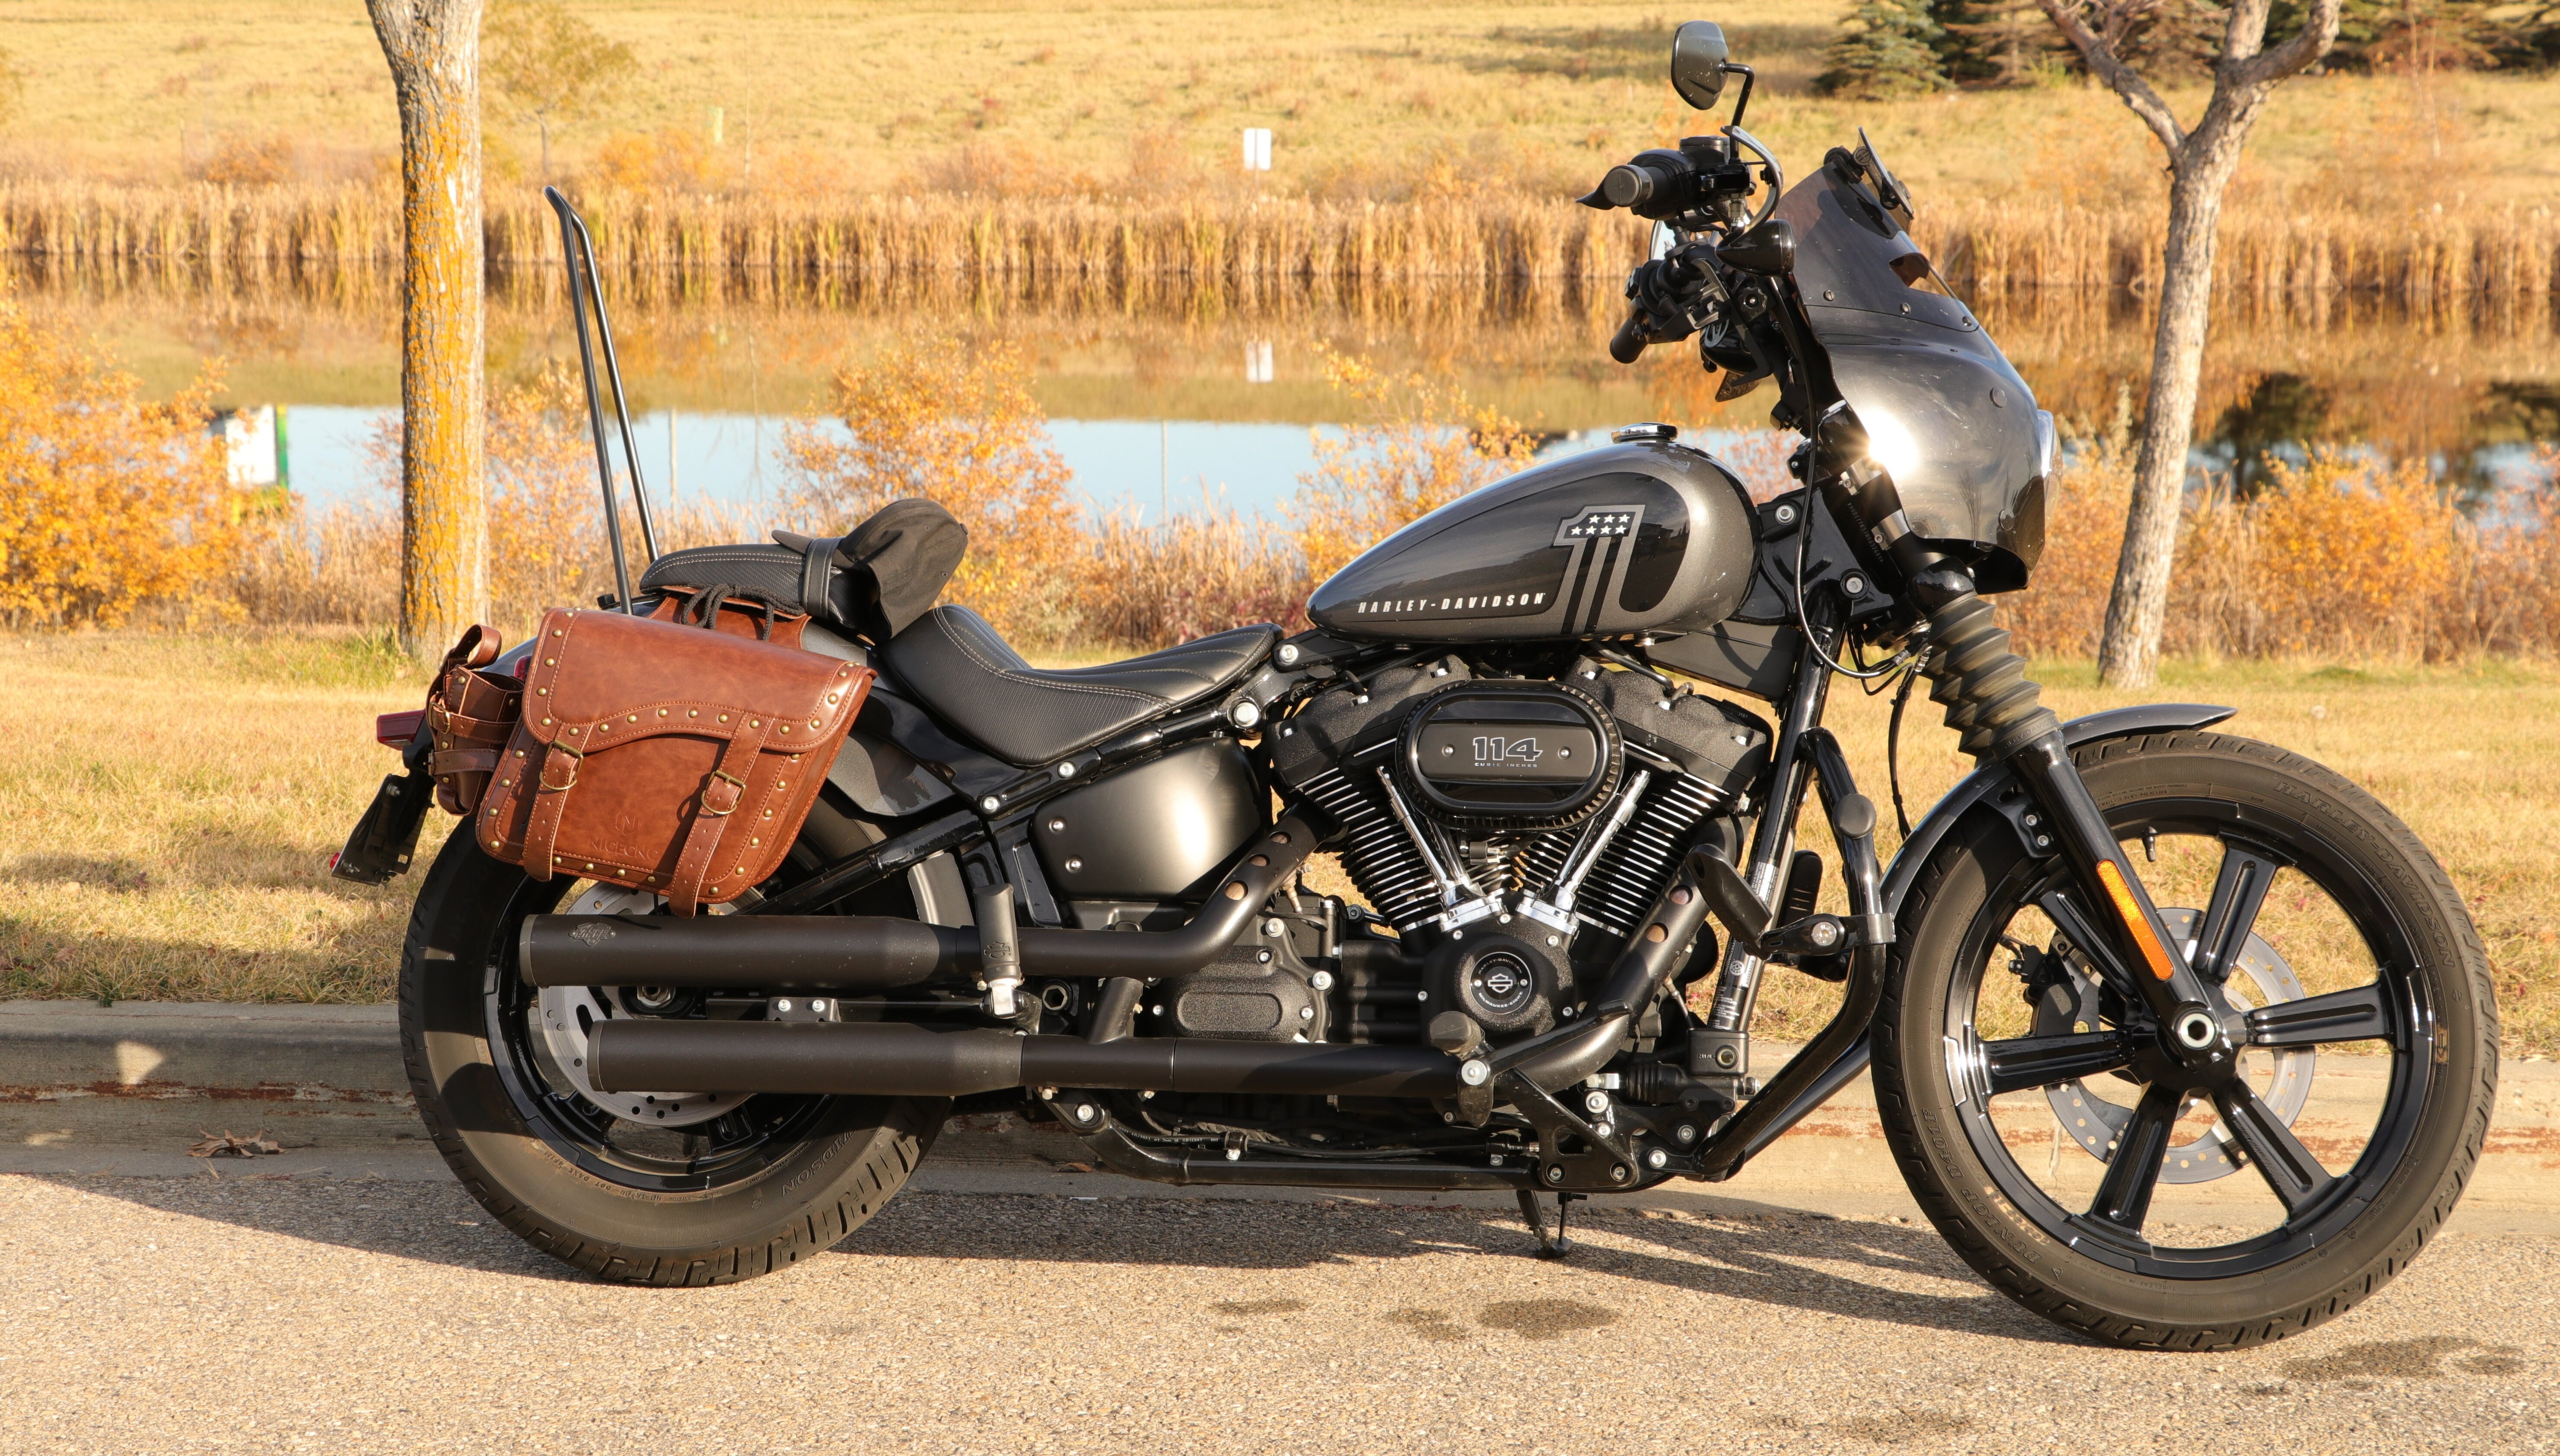 Motorcycle Bags: The Ultimate Guide to Making the Right Choice